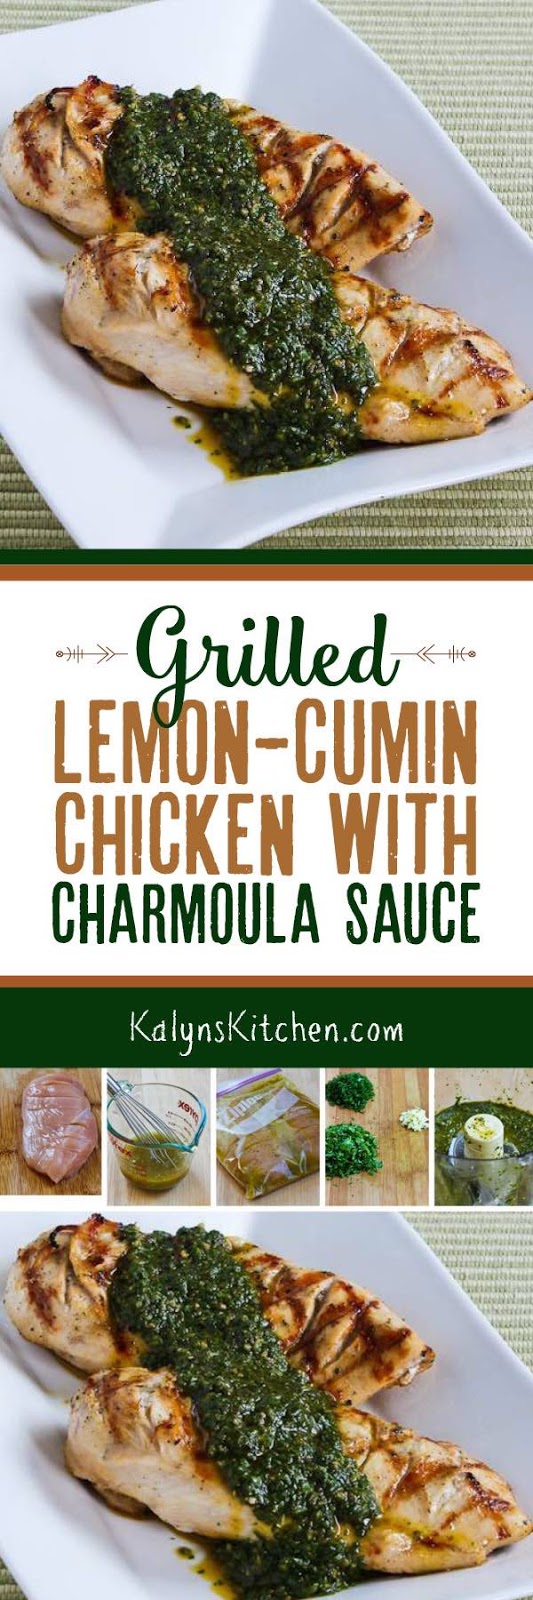 Grilled Lemon-Cumin Chicken with Charmoula Sauce - Kalyn's Kitchen